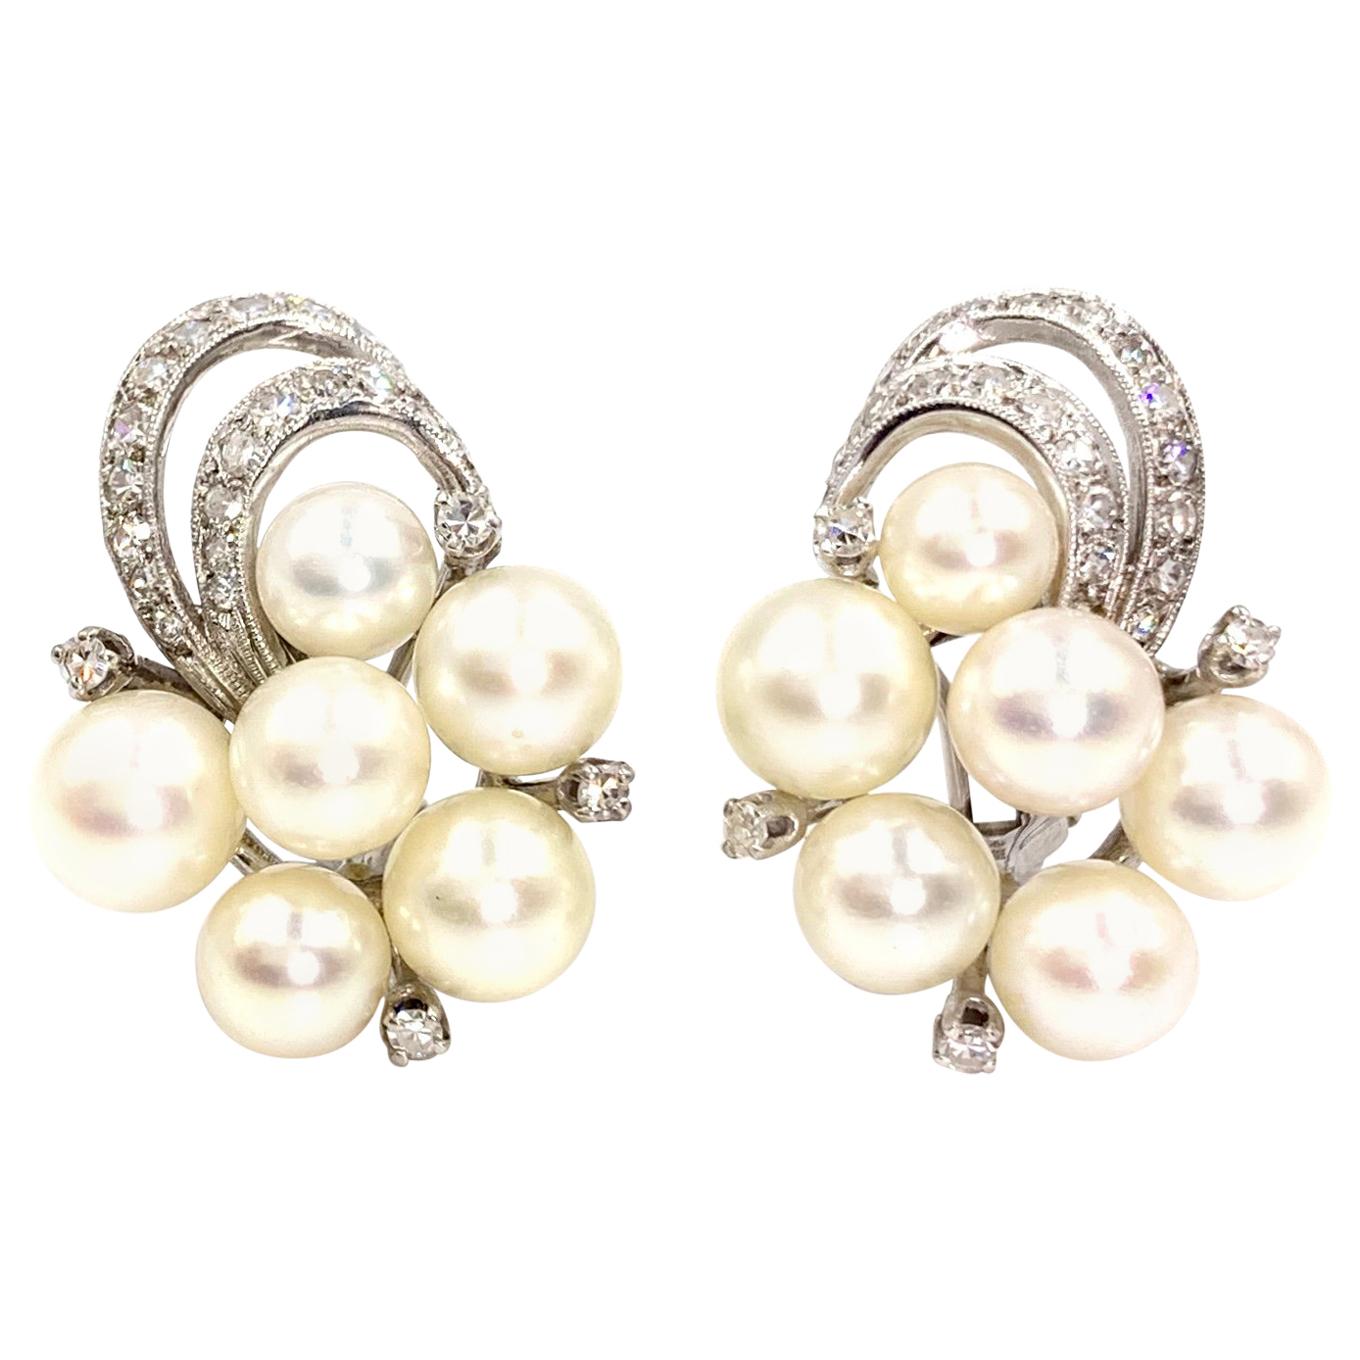 White Gold Diamond and Pearl Edwardian Inspired Earrings